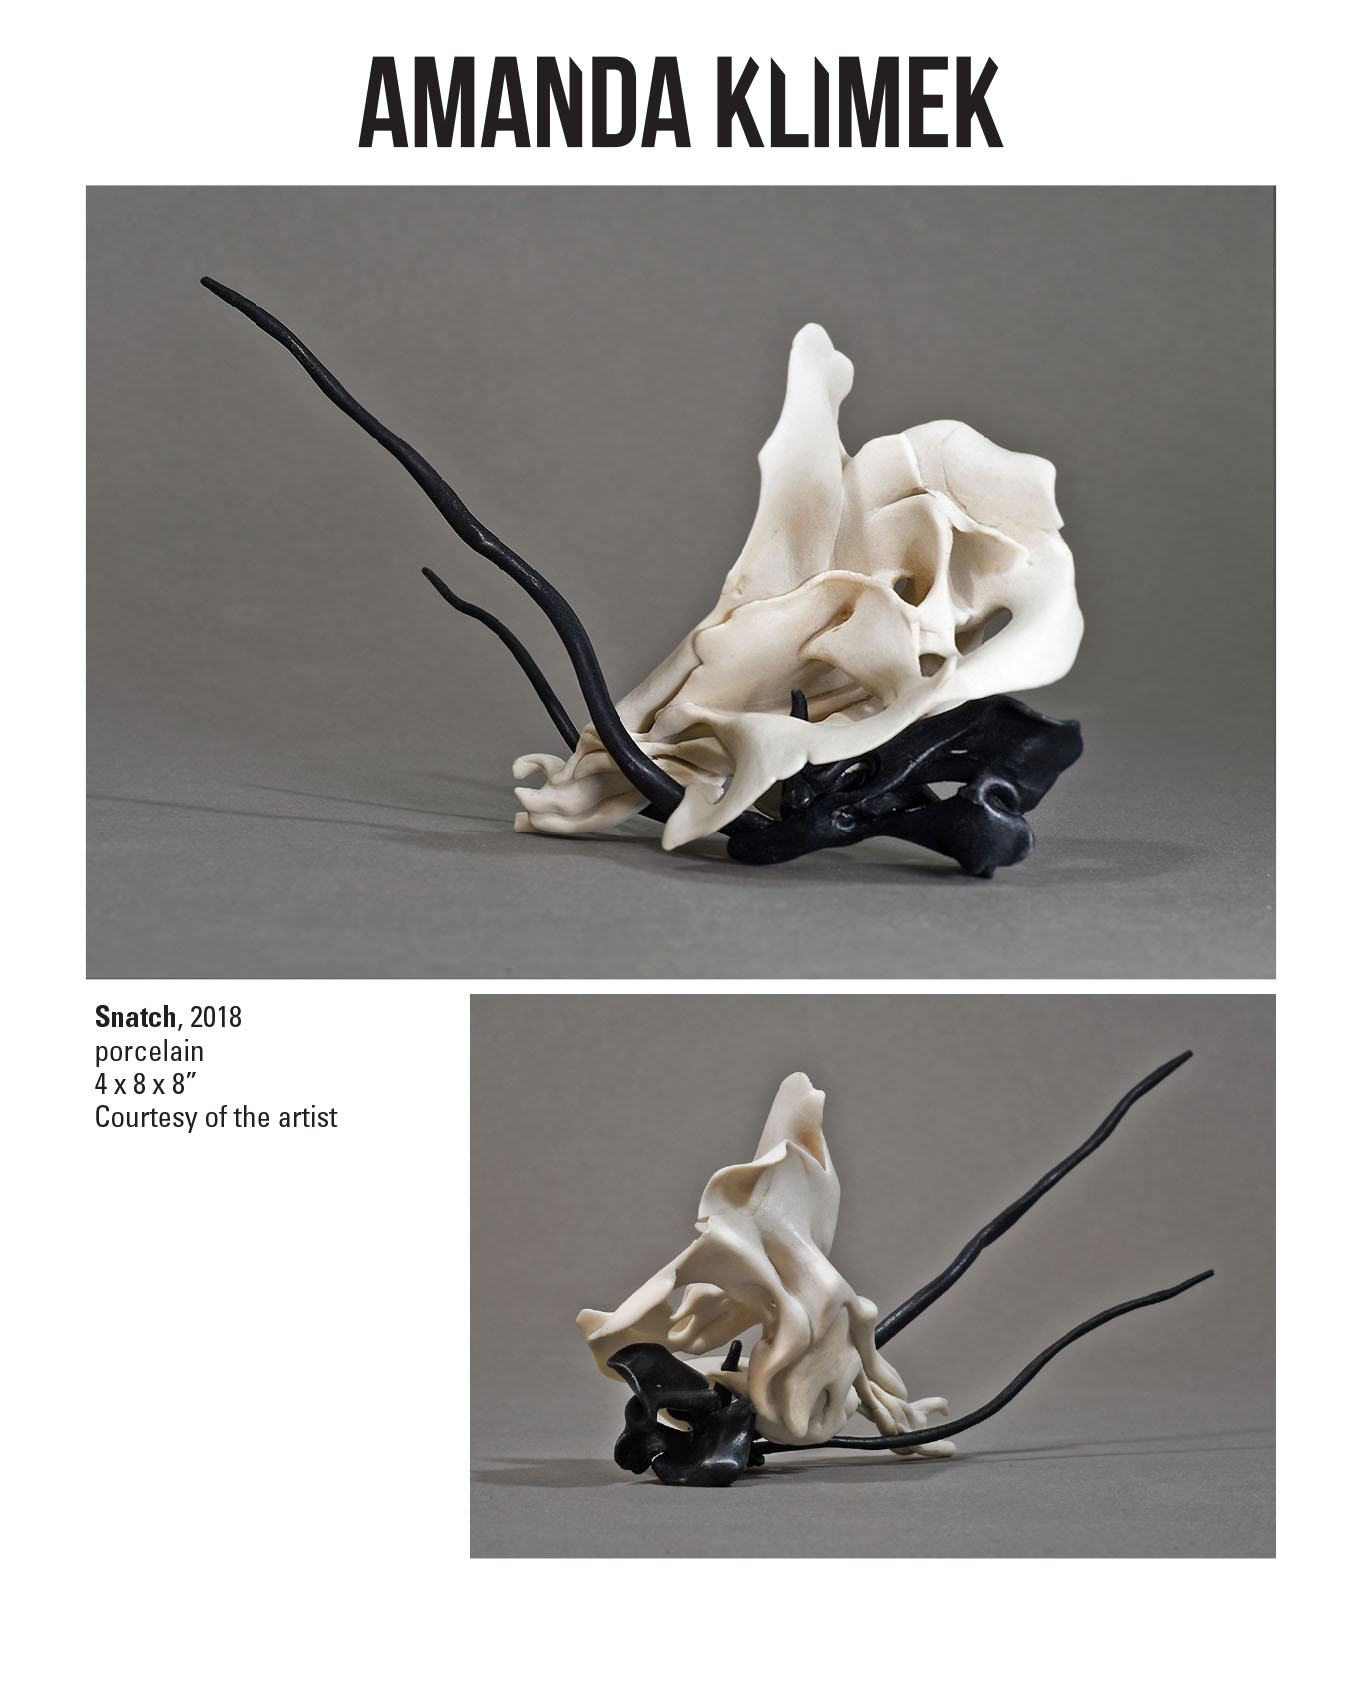 Amanda Klimek, Snatch, 2018. Porcelain. 4 x 8 x 8” Courtesy of the artist. A black and white colored sculpture with abstract shapes